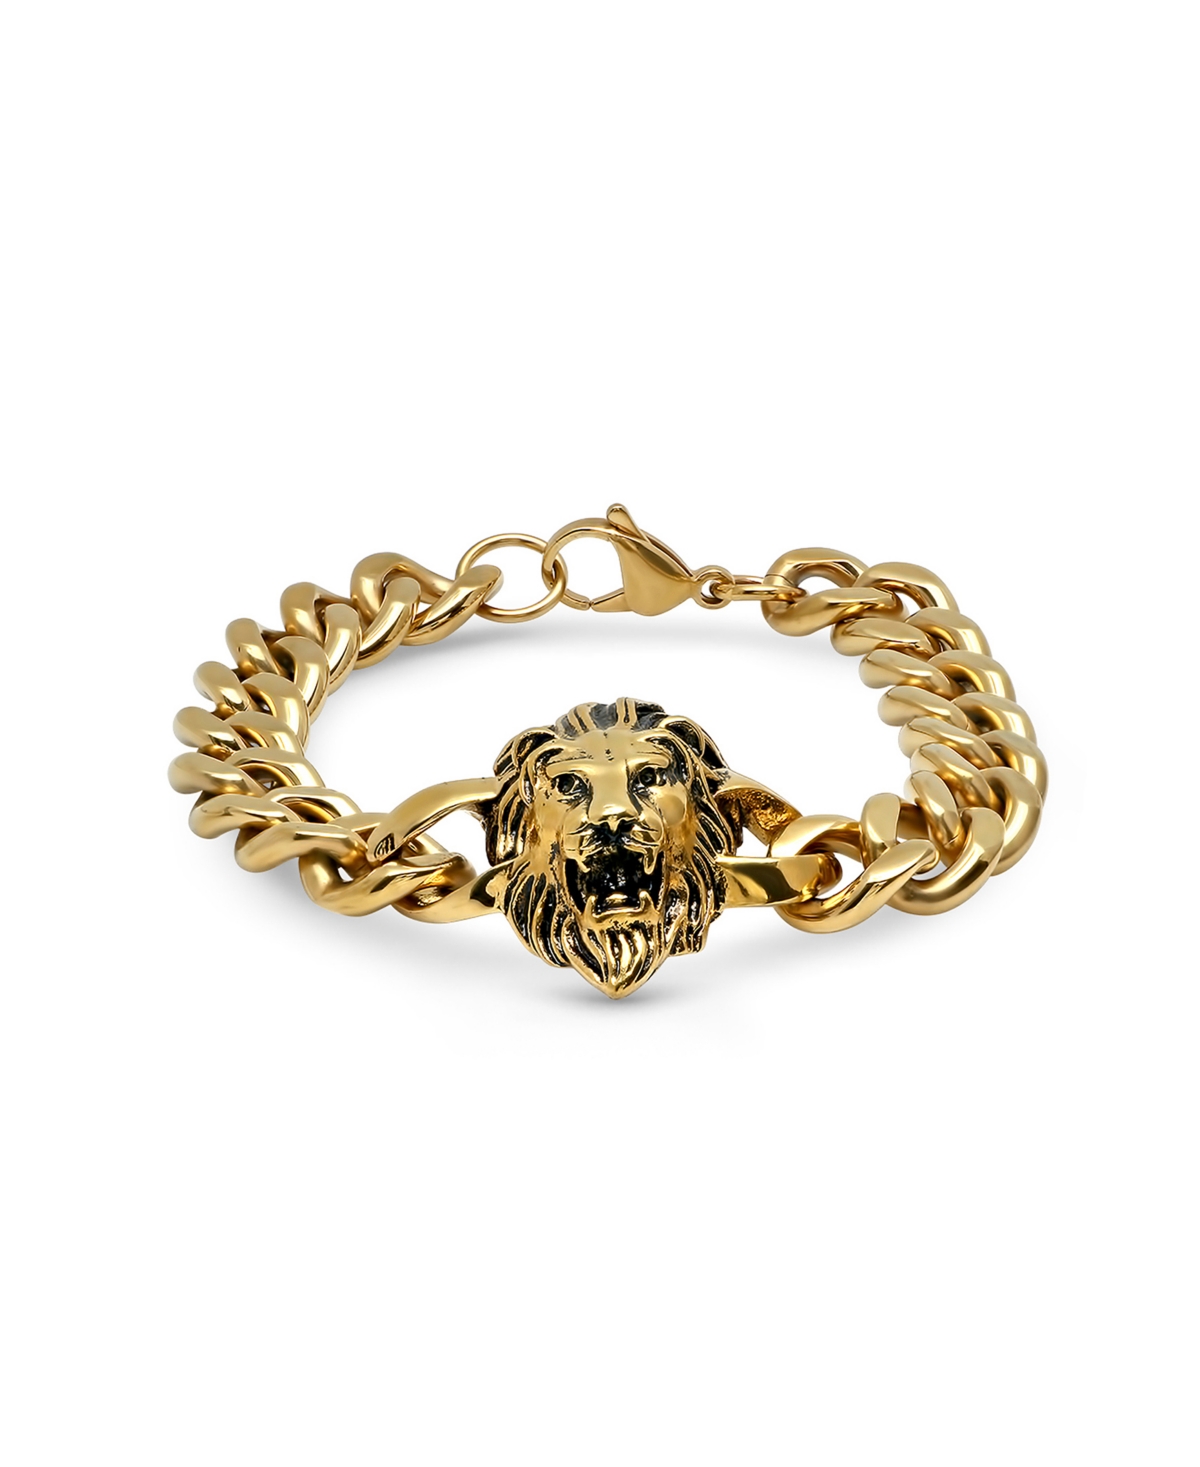 Men's 18k Gold Plated Stainless Steel Lion Head Chain Link Bracelet - Gold Plated